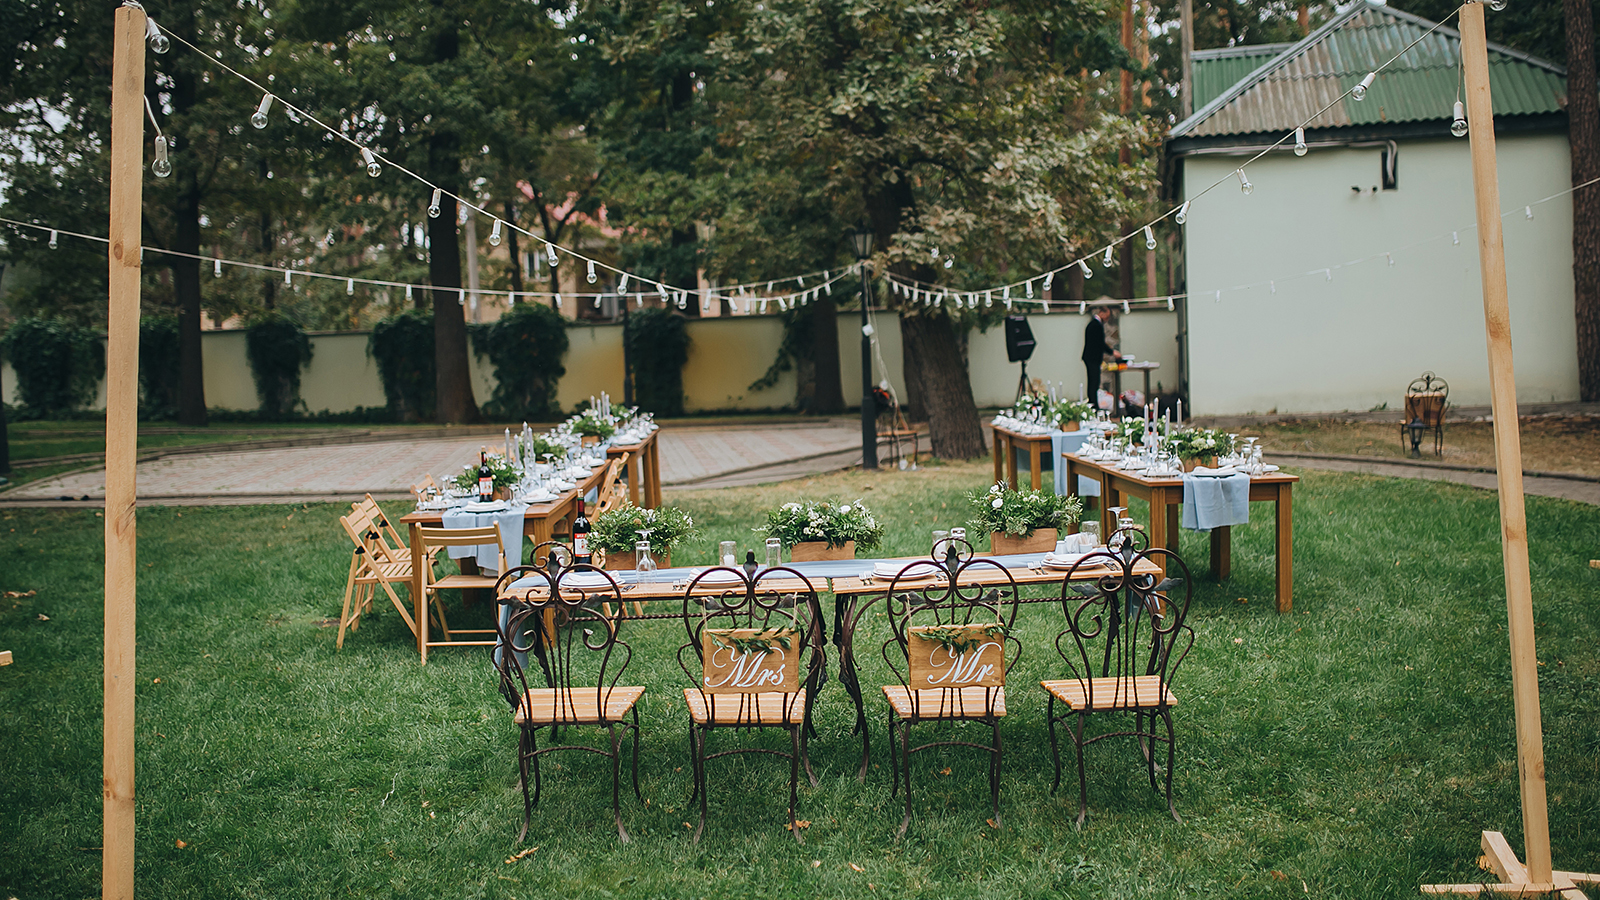 Wedding. Banquet. Chairs and honeymooners table decorated with candles, served with cutlery and crockery and covered with a tablecloth. The table stands on a green lawn in the backyard banquet area